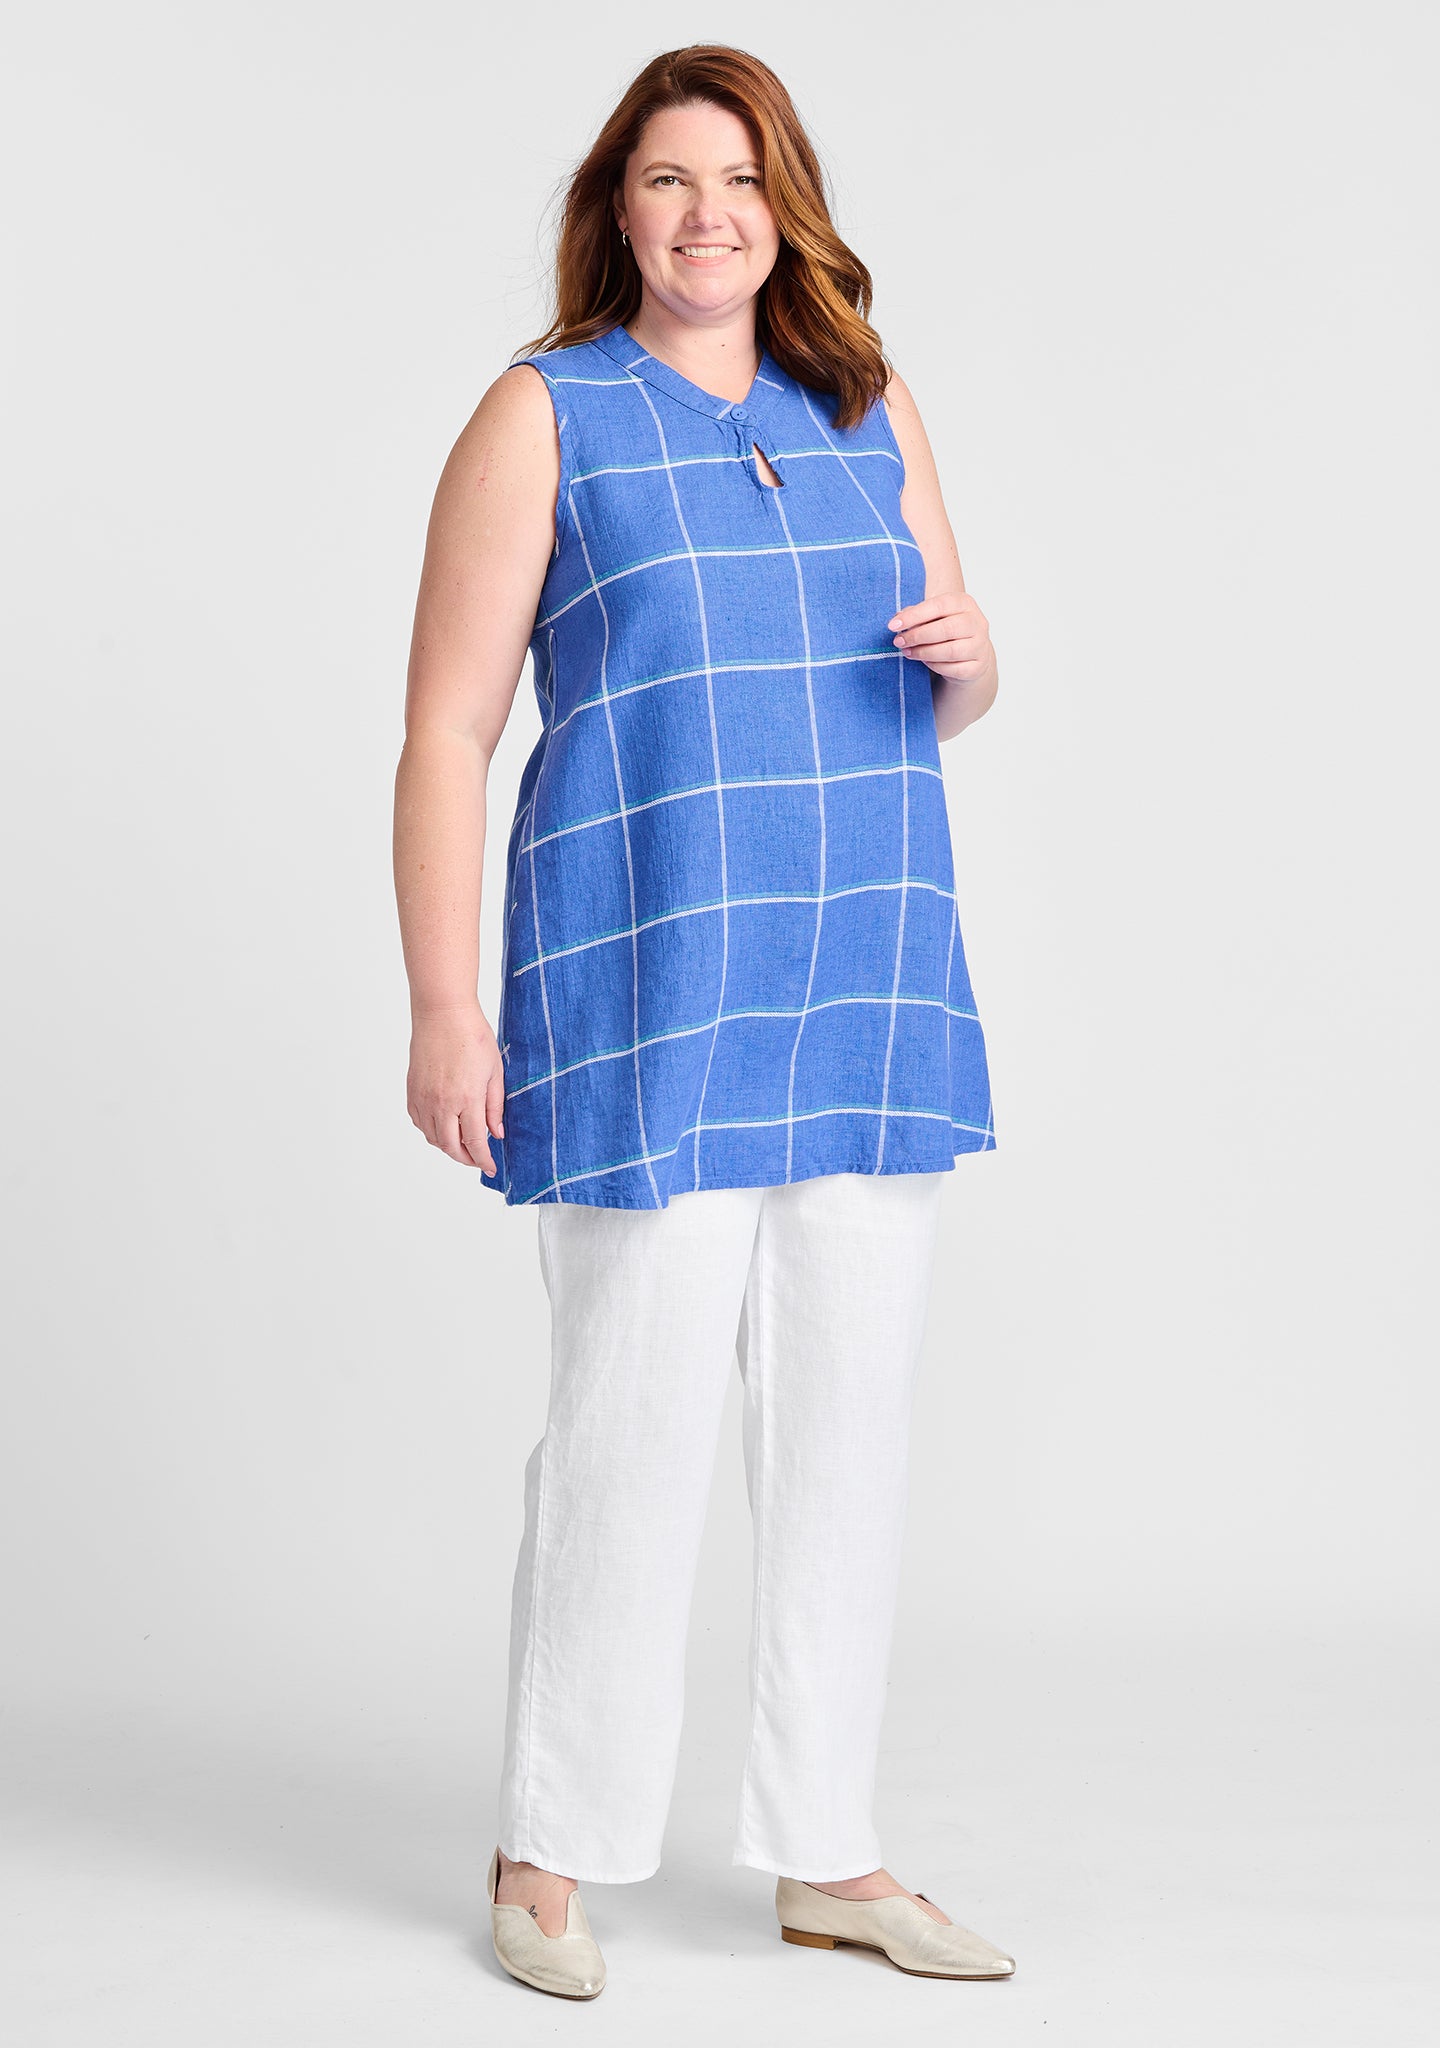 FLAX linen tank in blue with linen pants in white